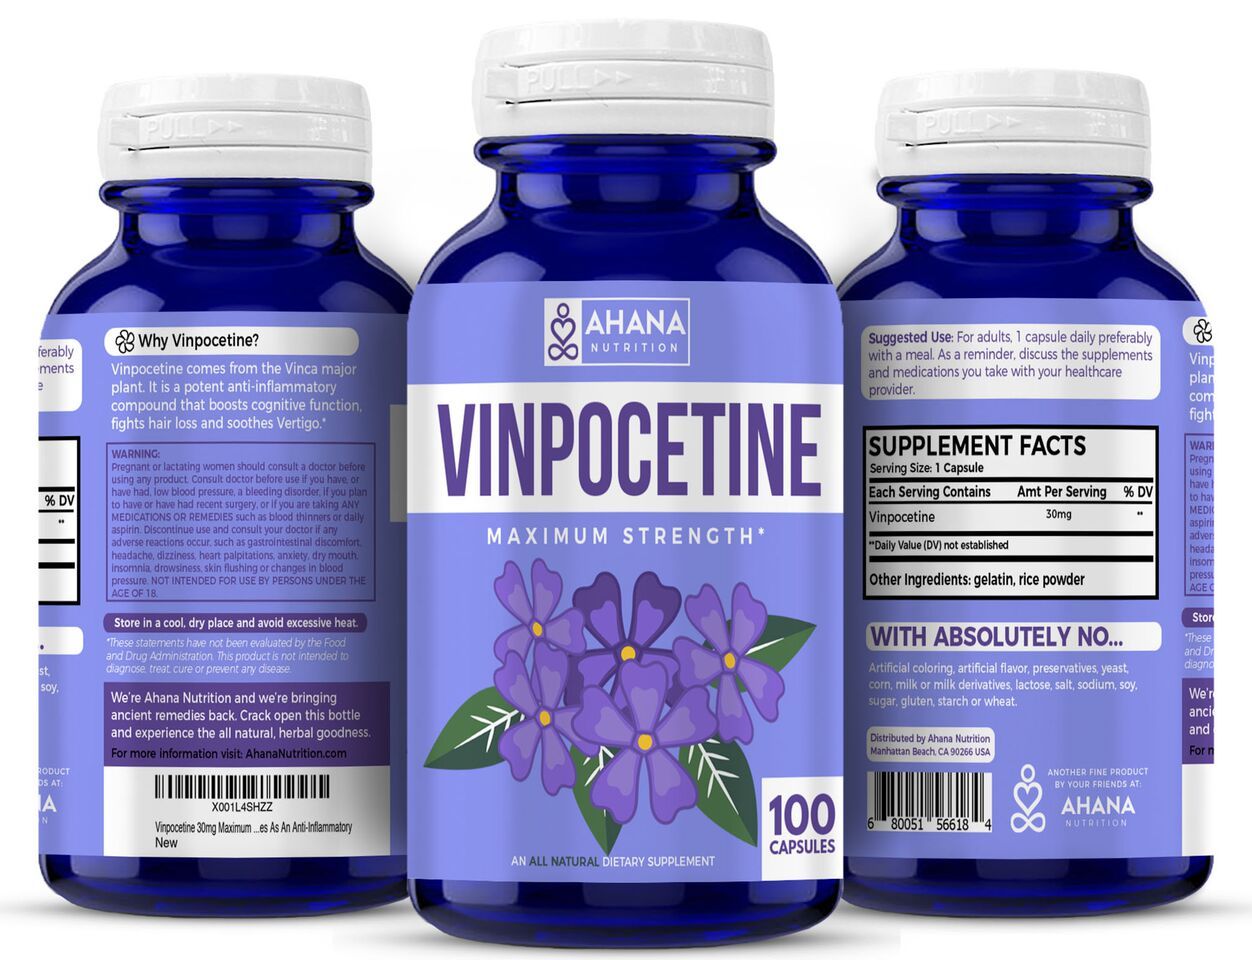 Vinpocetine powder has things covered for you